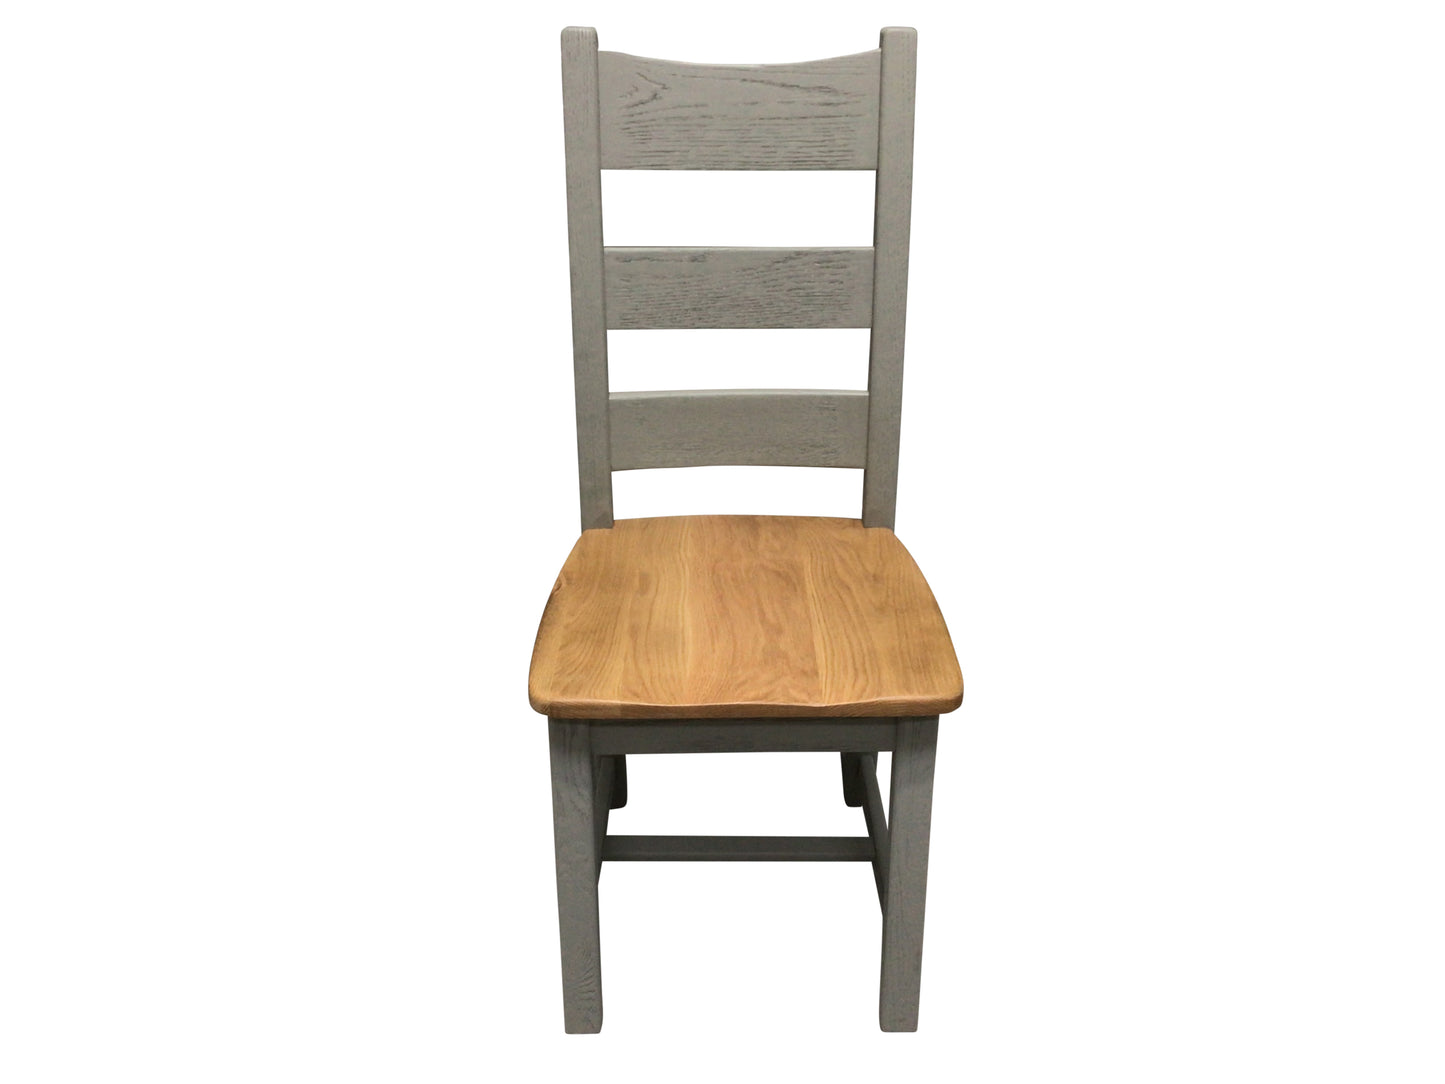 Danube Oak Dining Chair painted French Grey